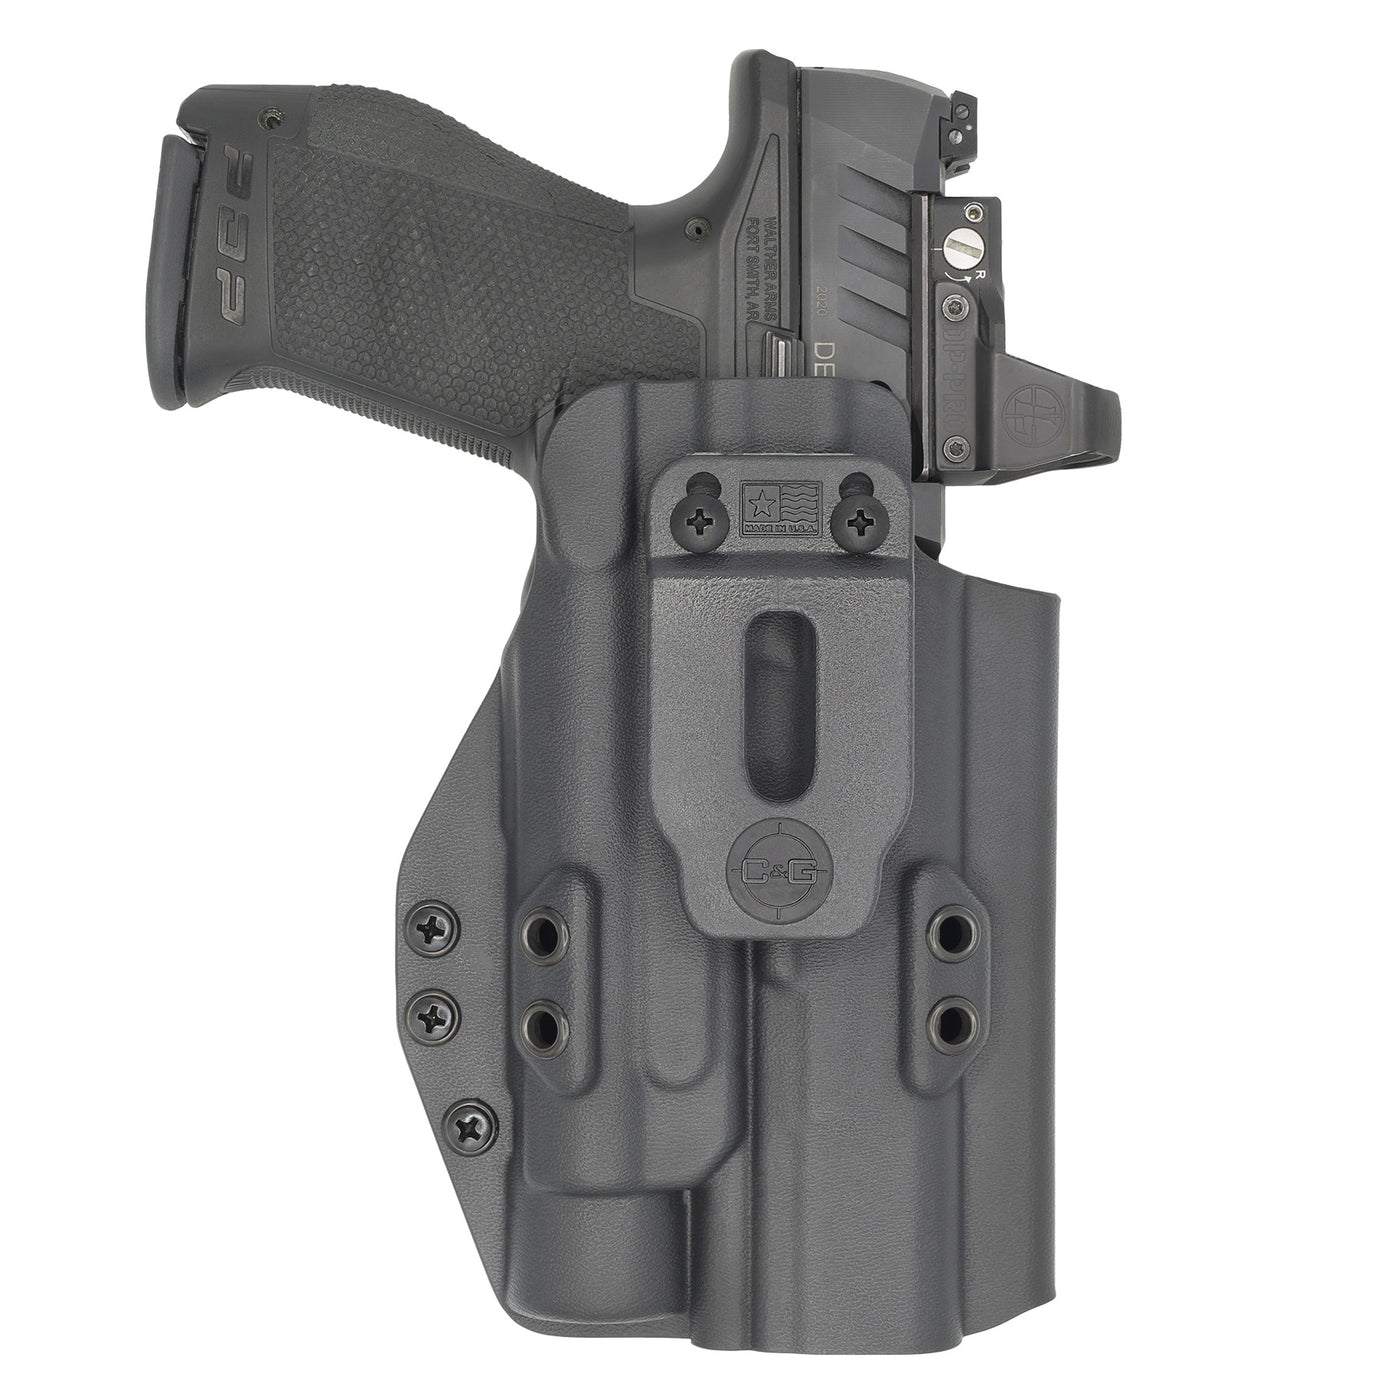 C&G Holsters custom IWB Tactical Beretta Streamlight TLR1 in holstered position